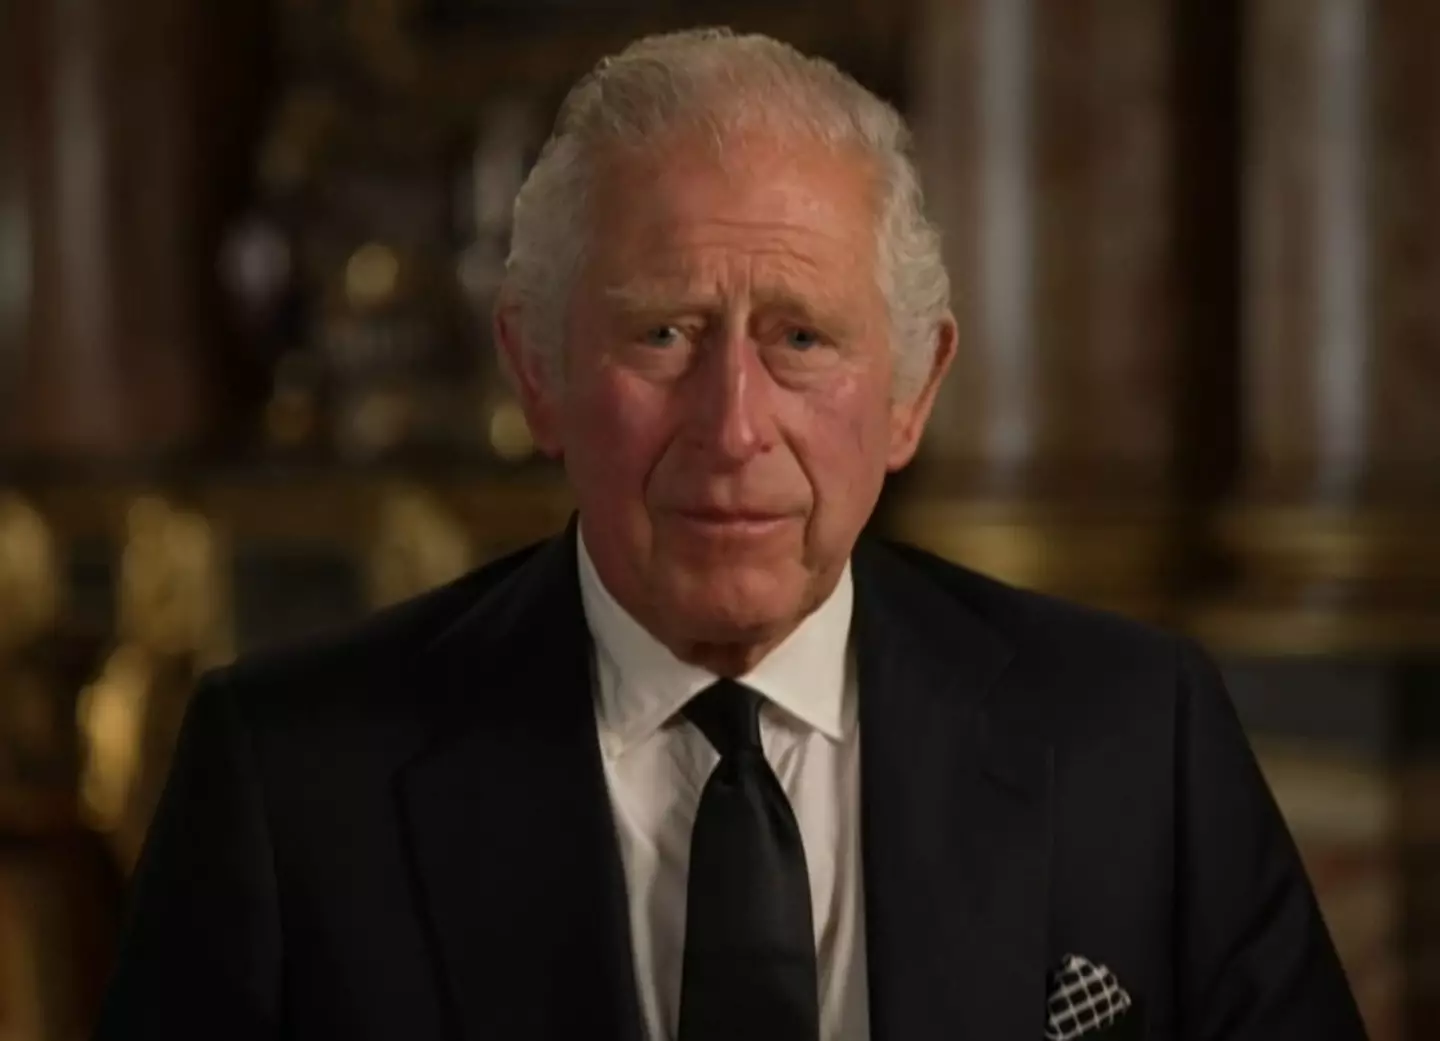 King Charles III said he wanted to 'express my love for Harry and Meghan' during his address to the nation.